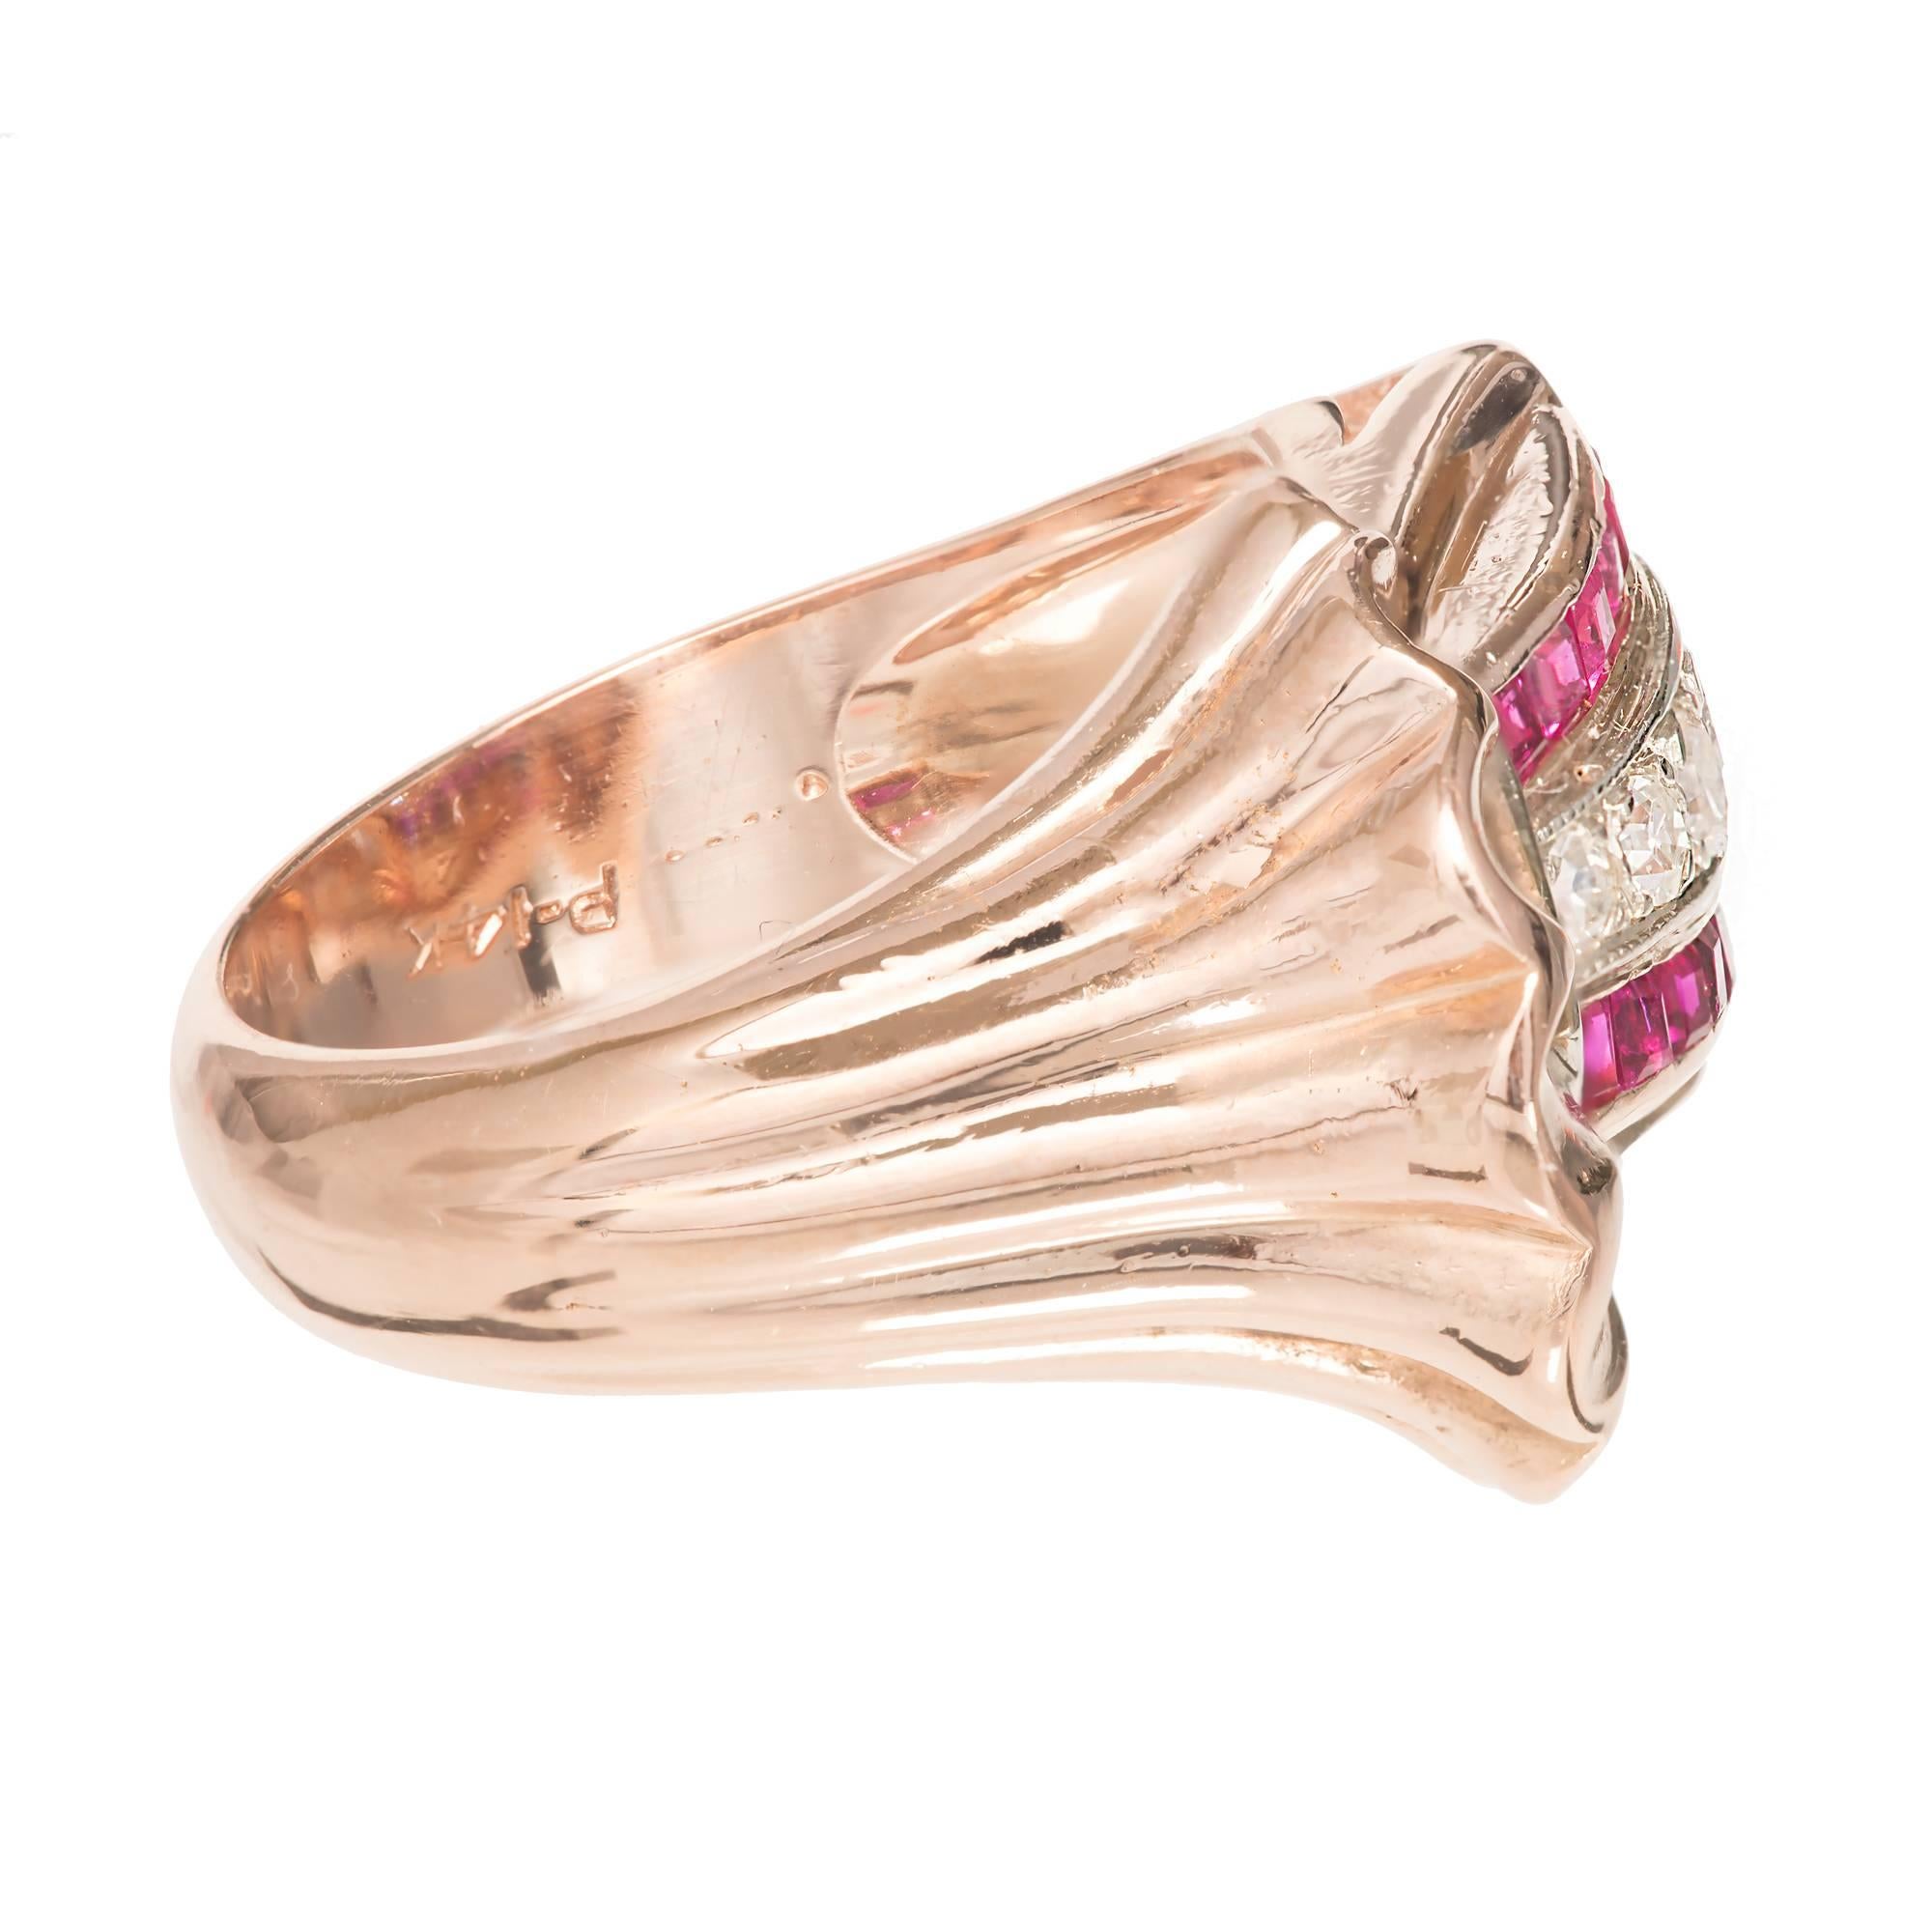 Ruby Diamond Rose White Gold Arrow Design Cocktail Ring circa 1930s In Good Condition For Sale In Stamford, CT